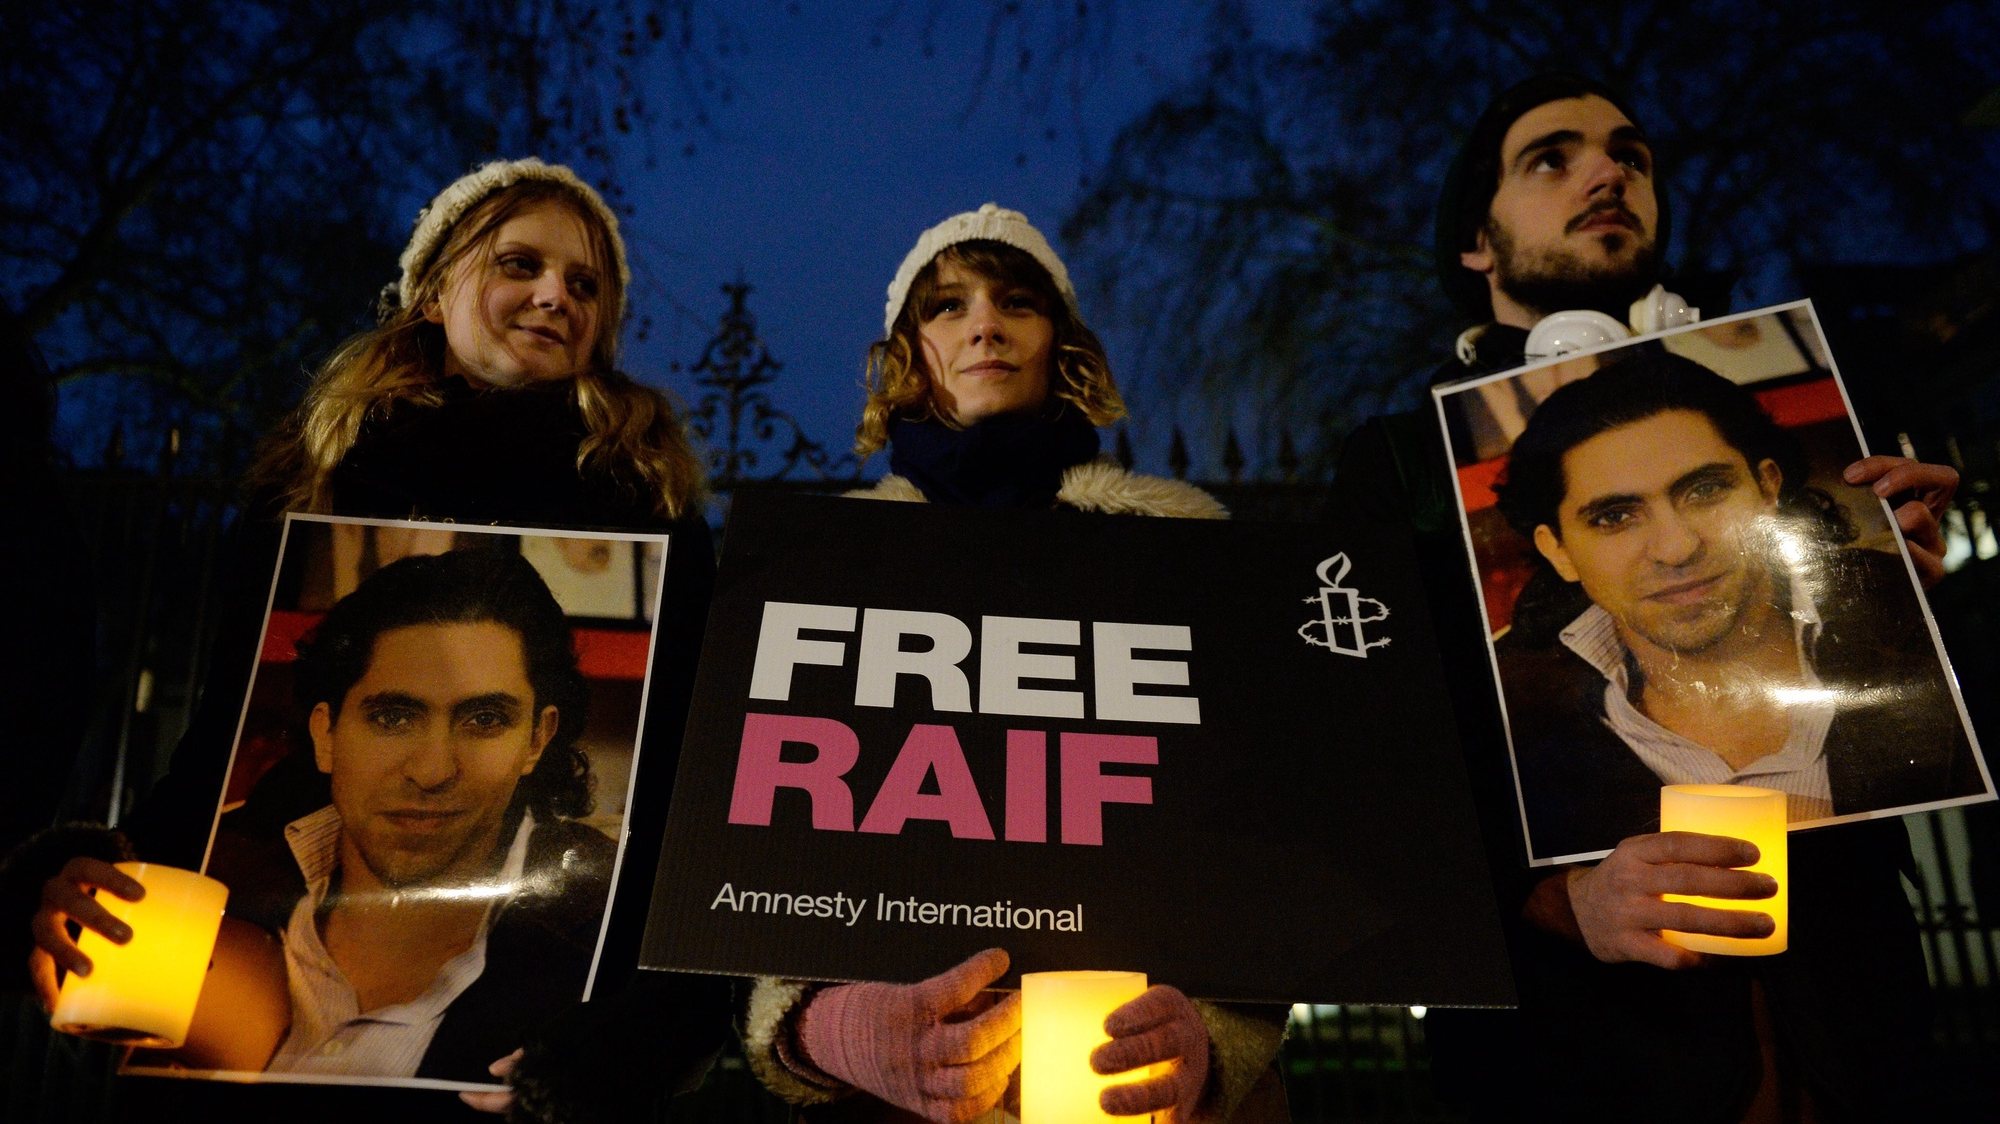 epa04576461 Protesters take part in an Amnesty International protest in front of the Saudi Embassy in London, Britain, 22 January 2015, against the flogging of Saudi blogger Raif Badawi . Saudi Arabian authorities on 09 January 2015 flogged liberal blogger Raif Badawi in public after convicting him of insulting Islam, a rights group said.  EPA/FACUNDO ARRIZABALAGA